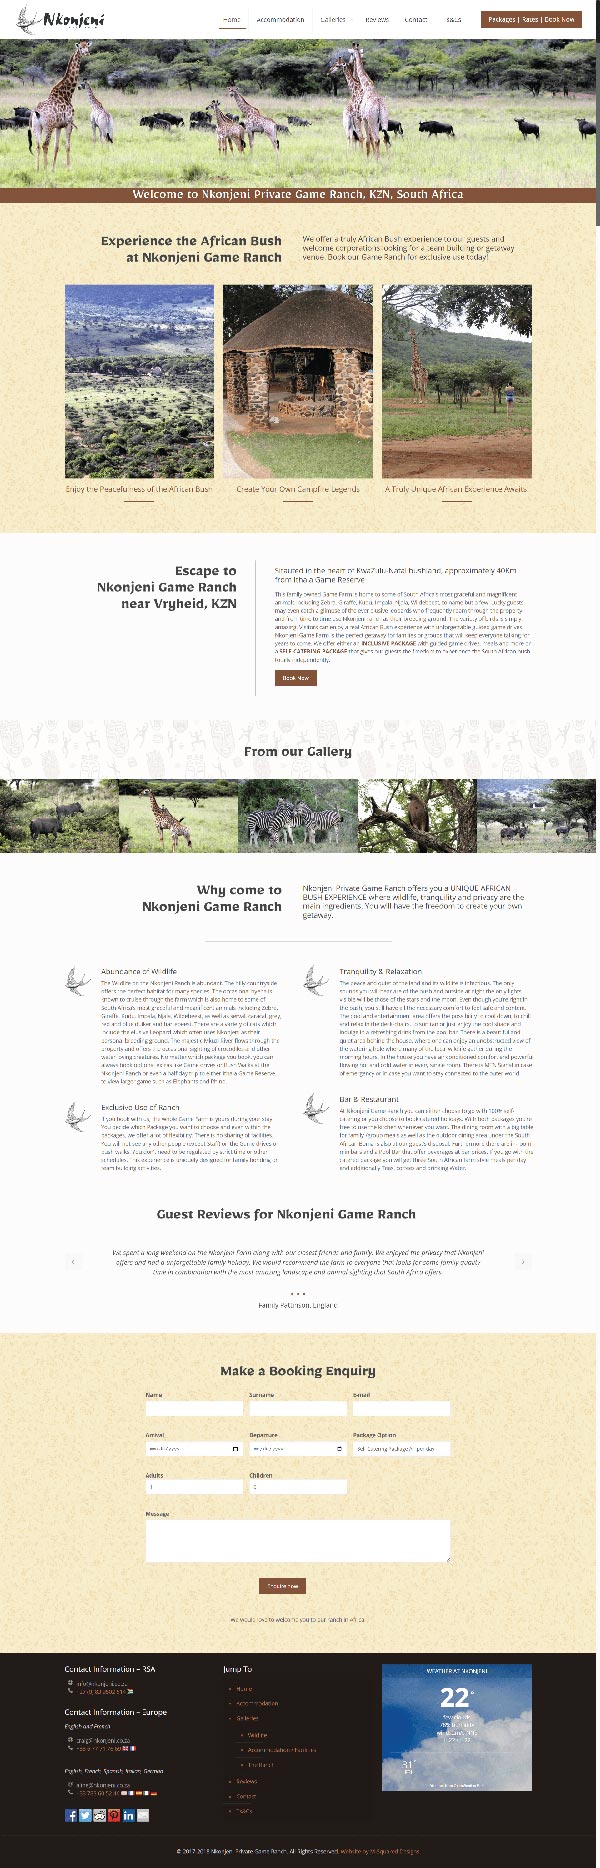 Nkonjeni Game Ranch Website by M-Squared Designs.  Web & Hosting.